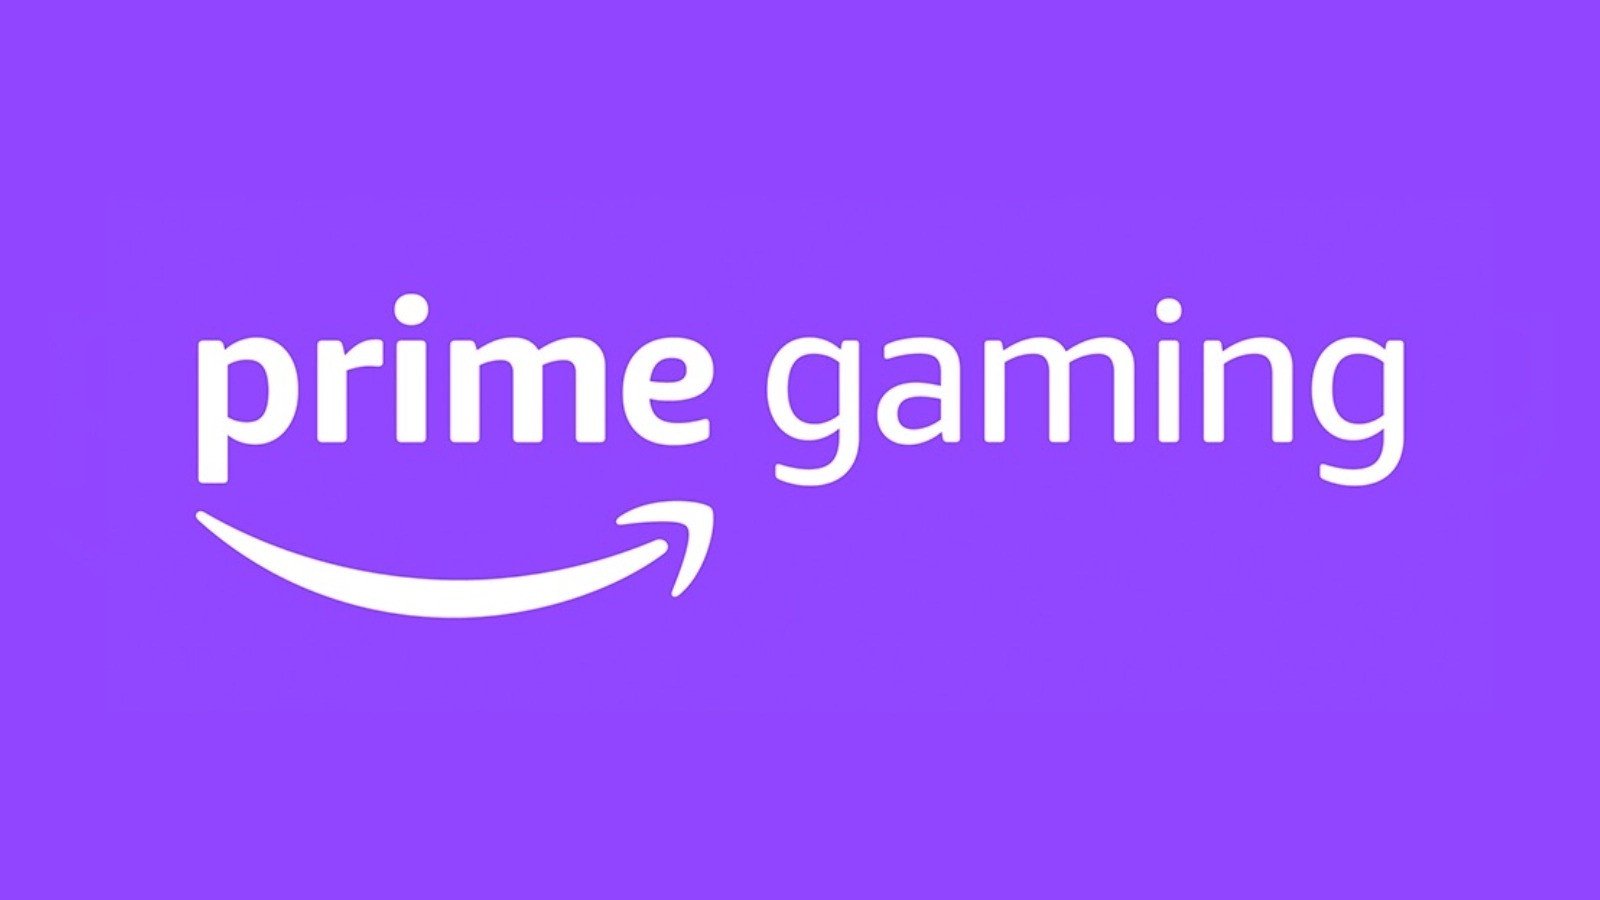 Photo of Prime Gaming, the last free game available on Prime Day: It’s Star Wars